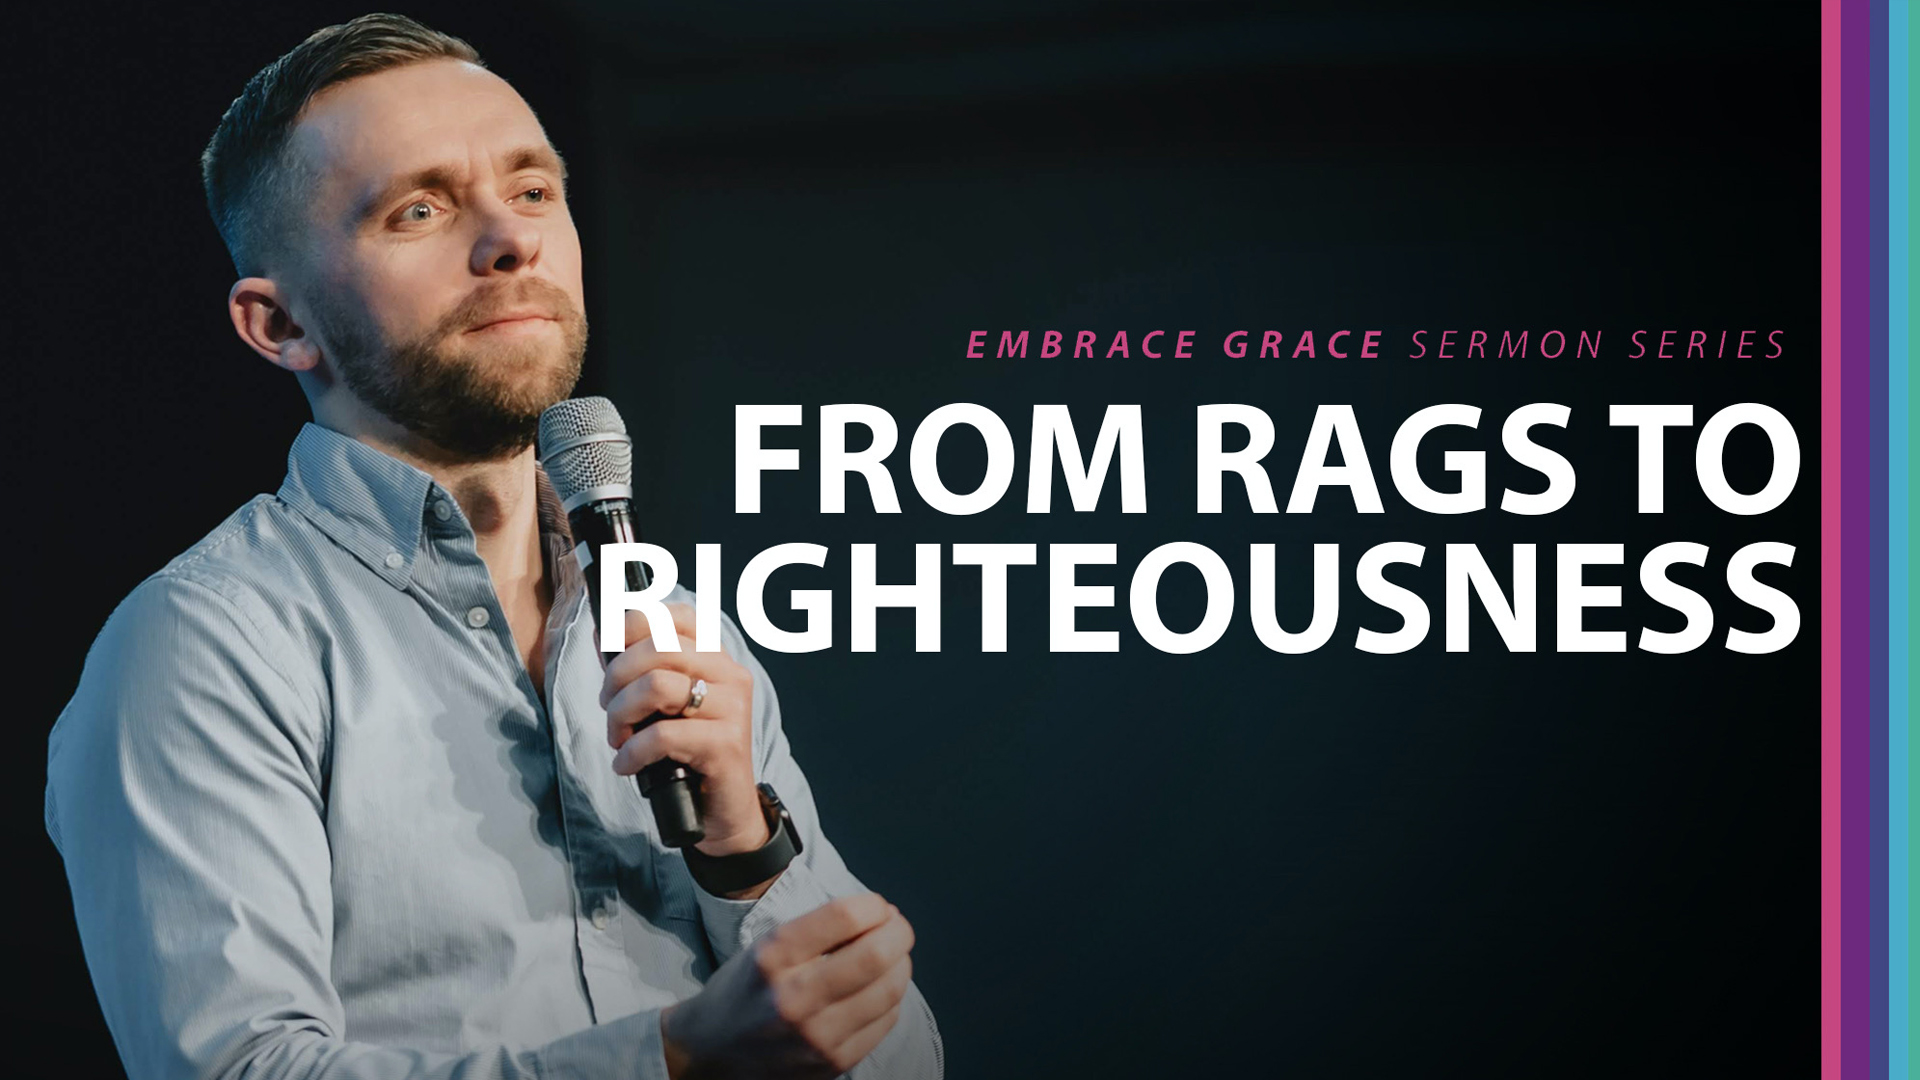 Featured image for “From Rags to Righteousness”